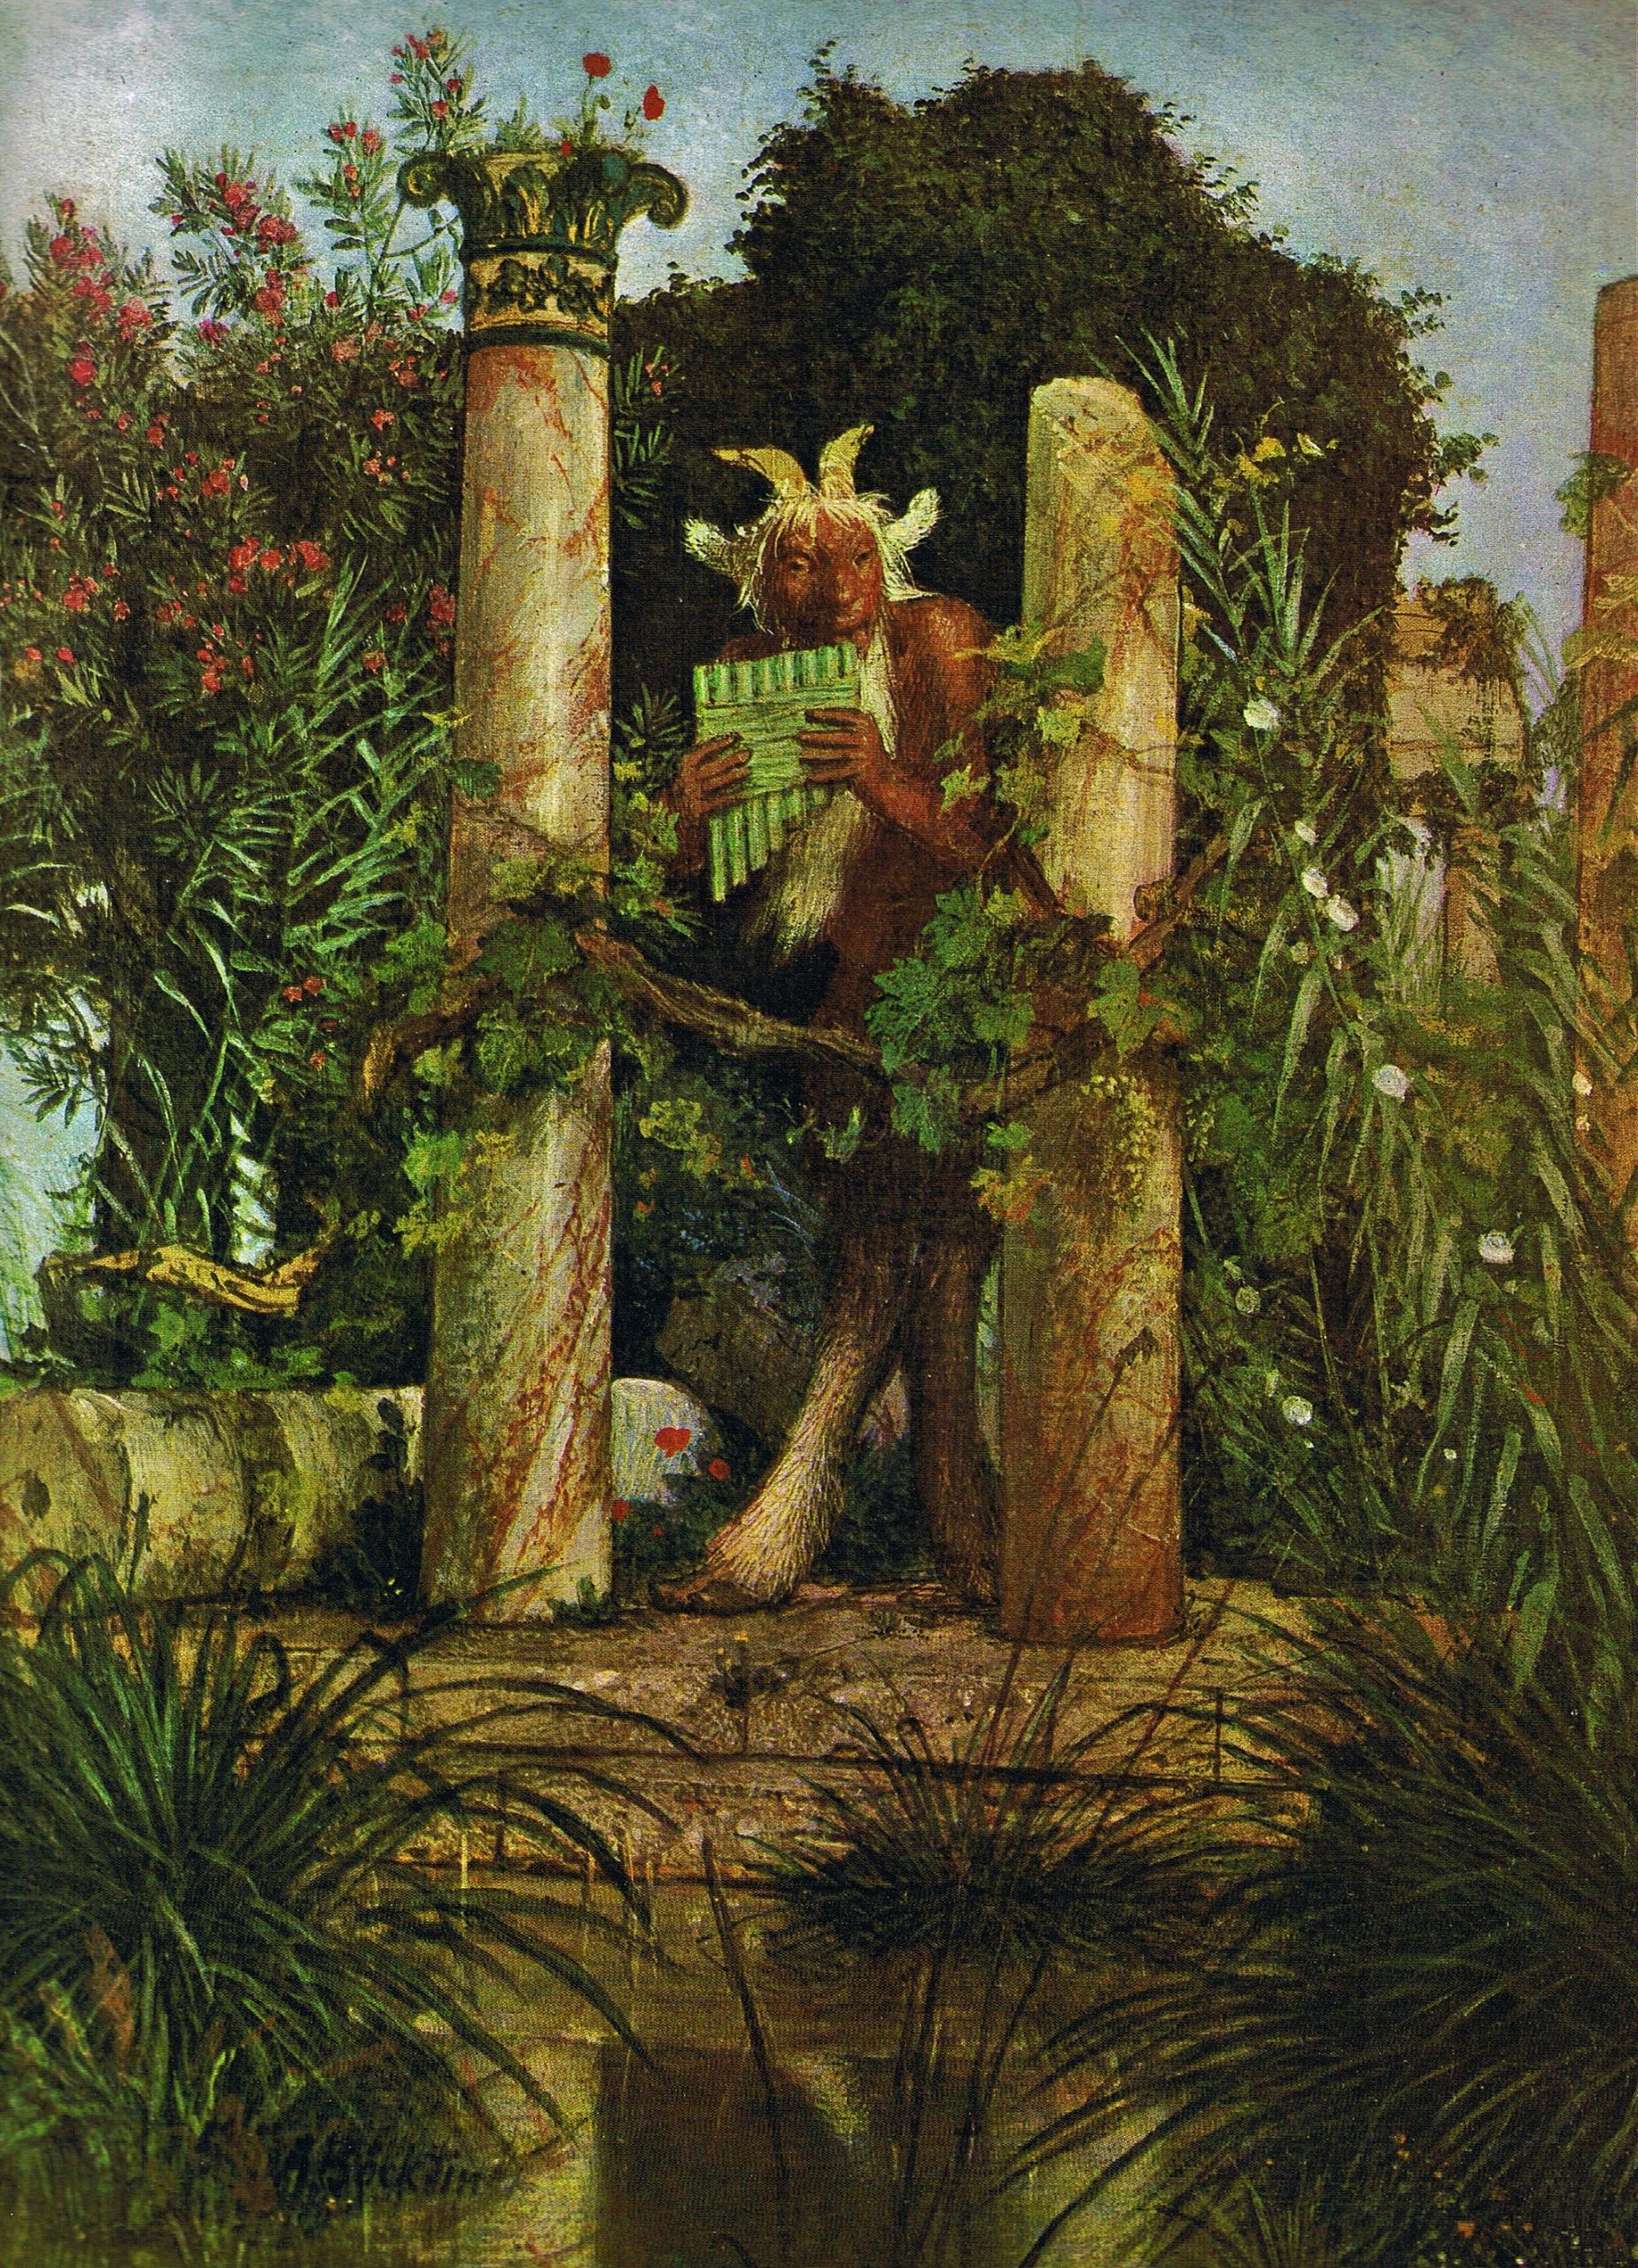 A painting of a mythological creature with hooves and horns standing among a ruin holding a pan flute. There is overgrowth of vines and foliage.